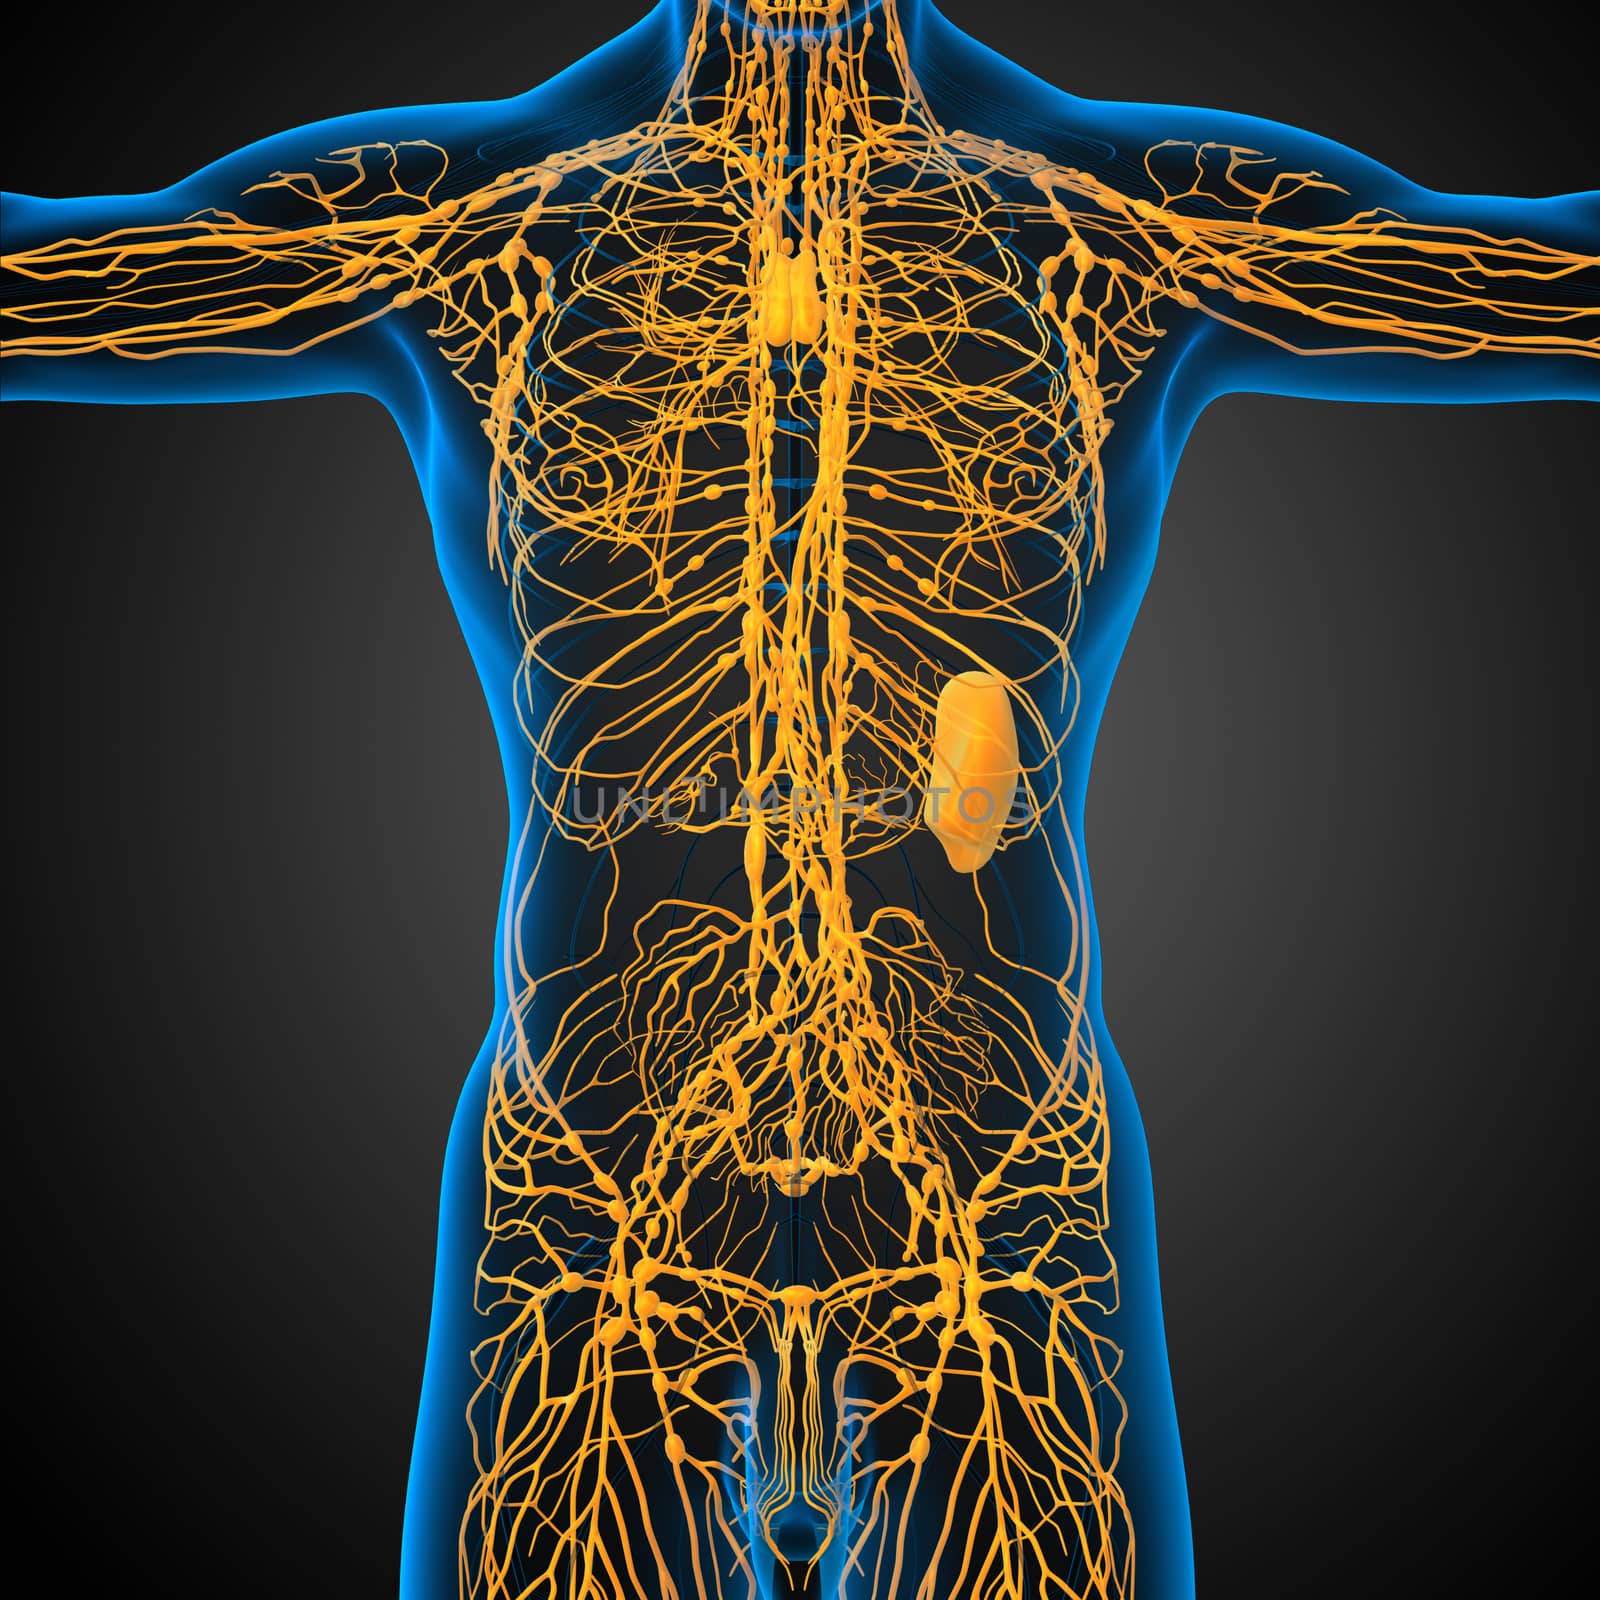 3d render medical illustration of the lymphatic system - front view